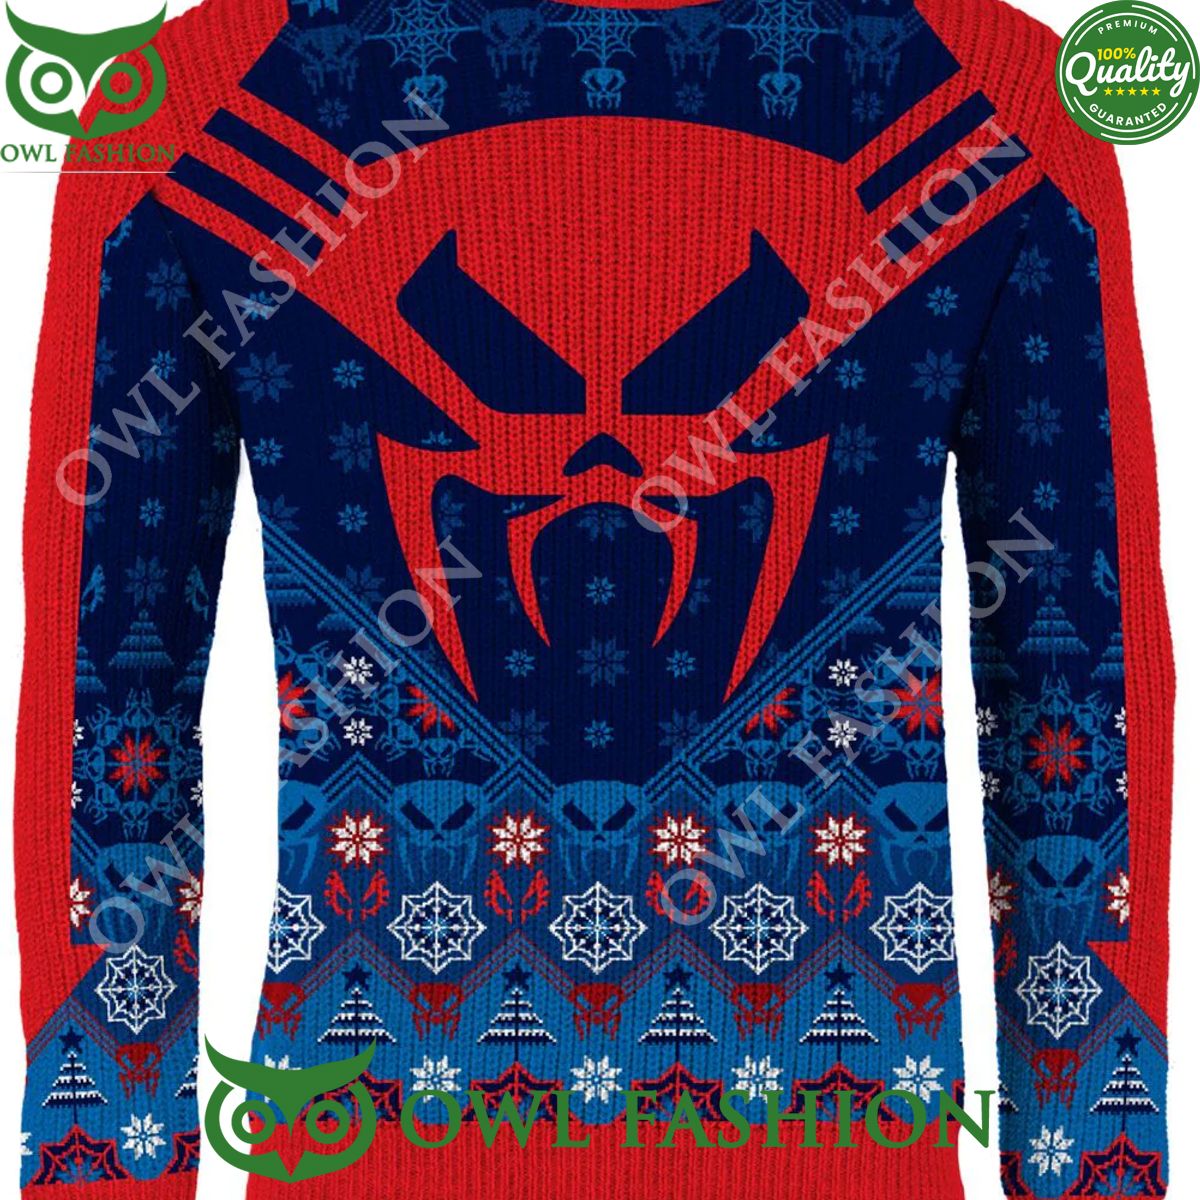 spider man party like its 2099 christmas jumper 1 00mqW.jpg